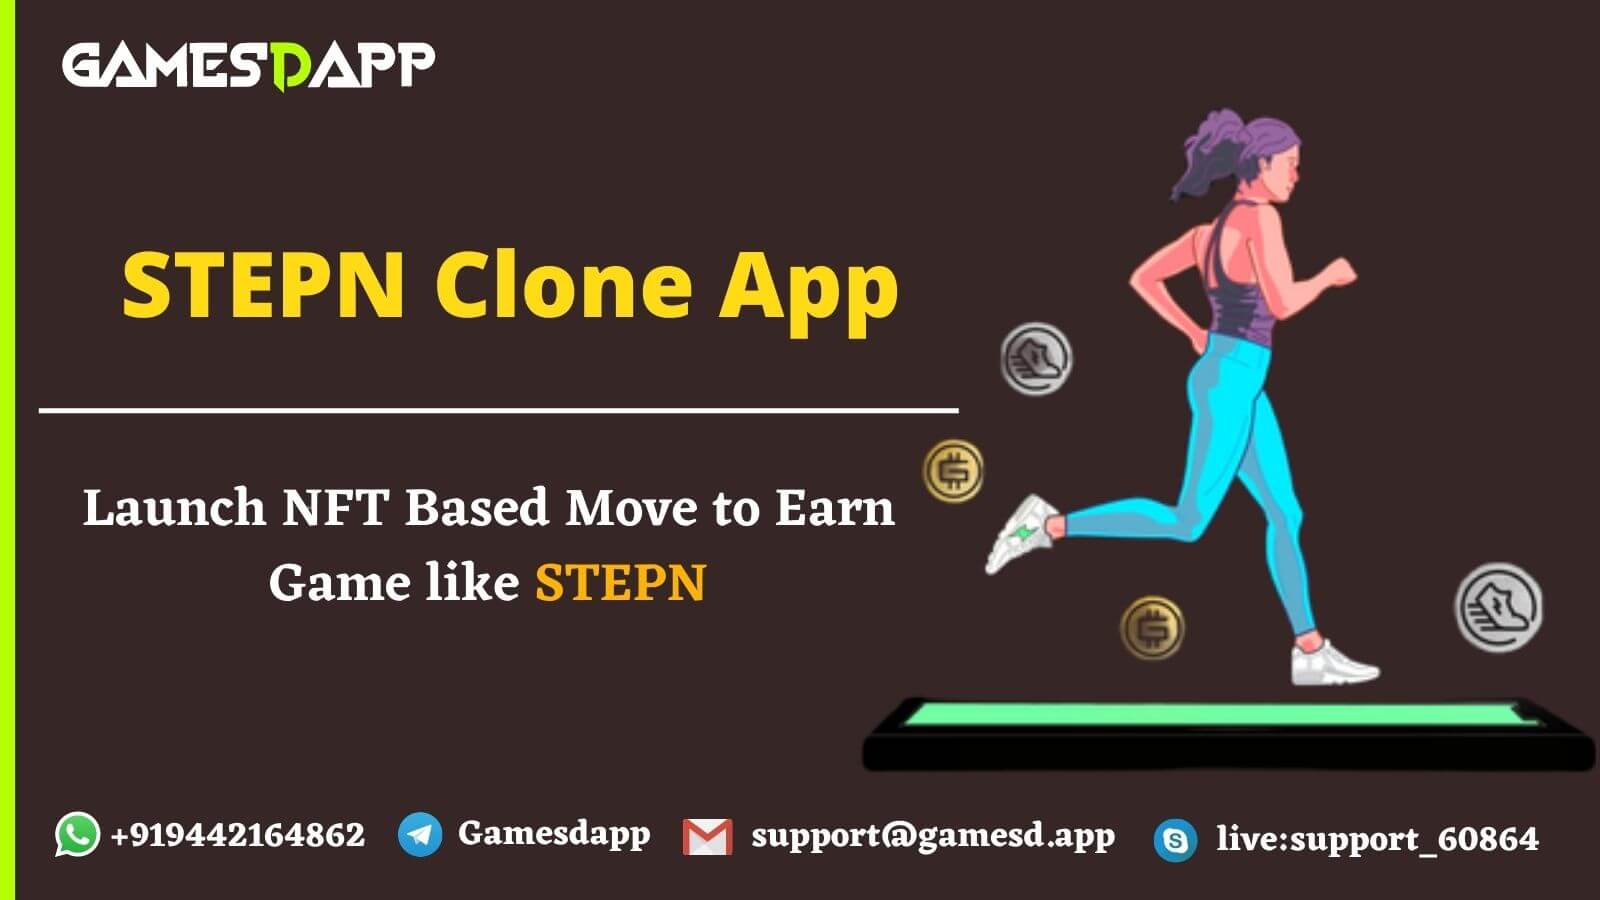 STEPN Clone App - To Launch NFT Based Move to Earn Gaming Lifestyle App like STEPN